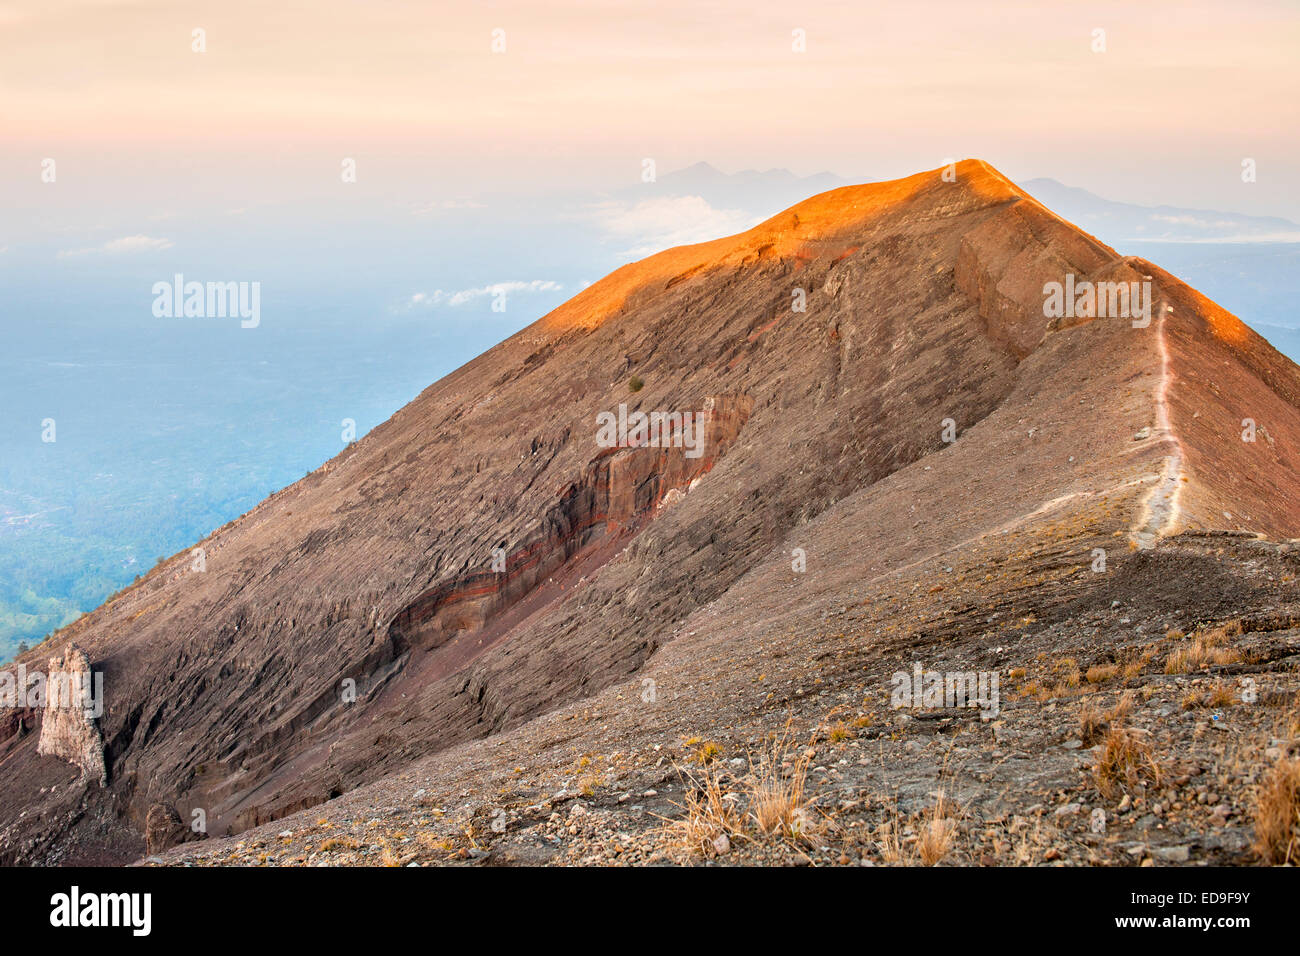 The hiking path on the summit of Gunung Agung (3142m), the highest volcano on the island of Bali, Indonesia. Stock Photo